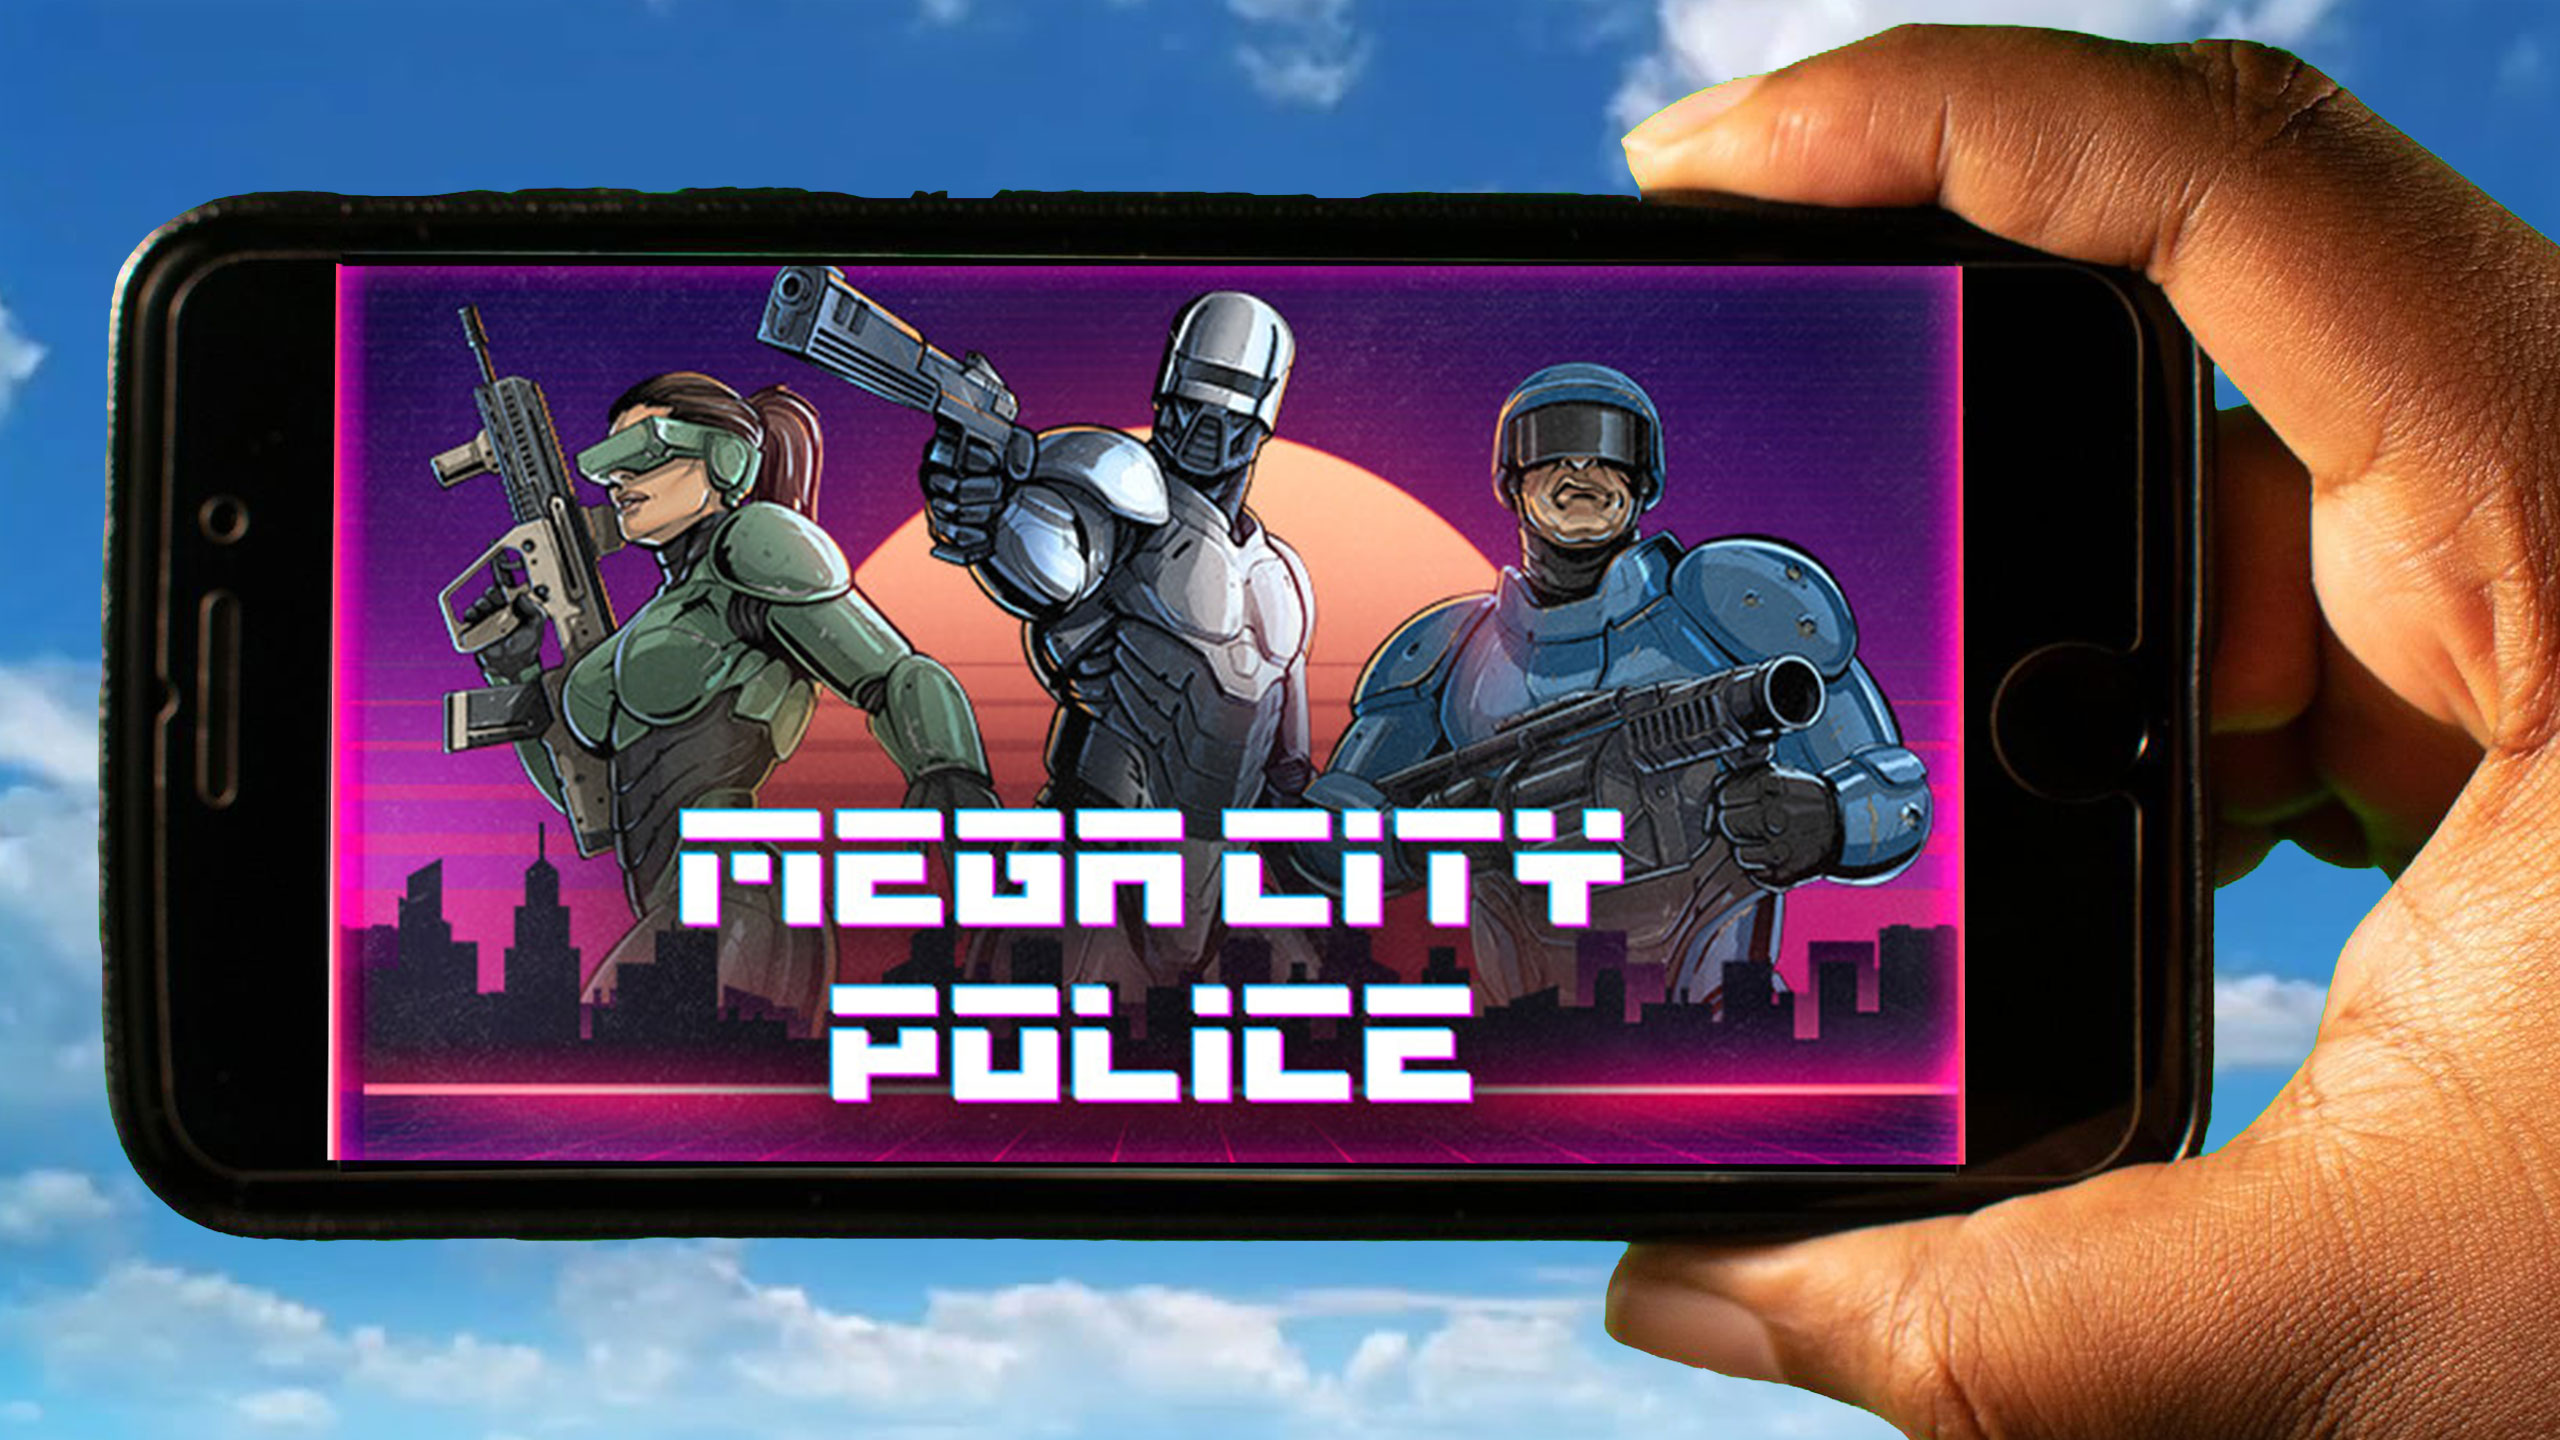 Mega City Police Mobile - How to play on an Android or iOS phone? - Games  Manuals